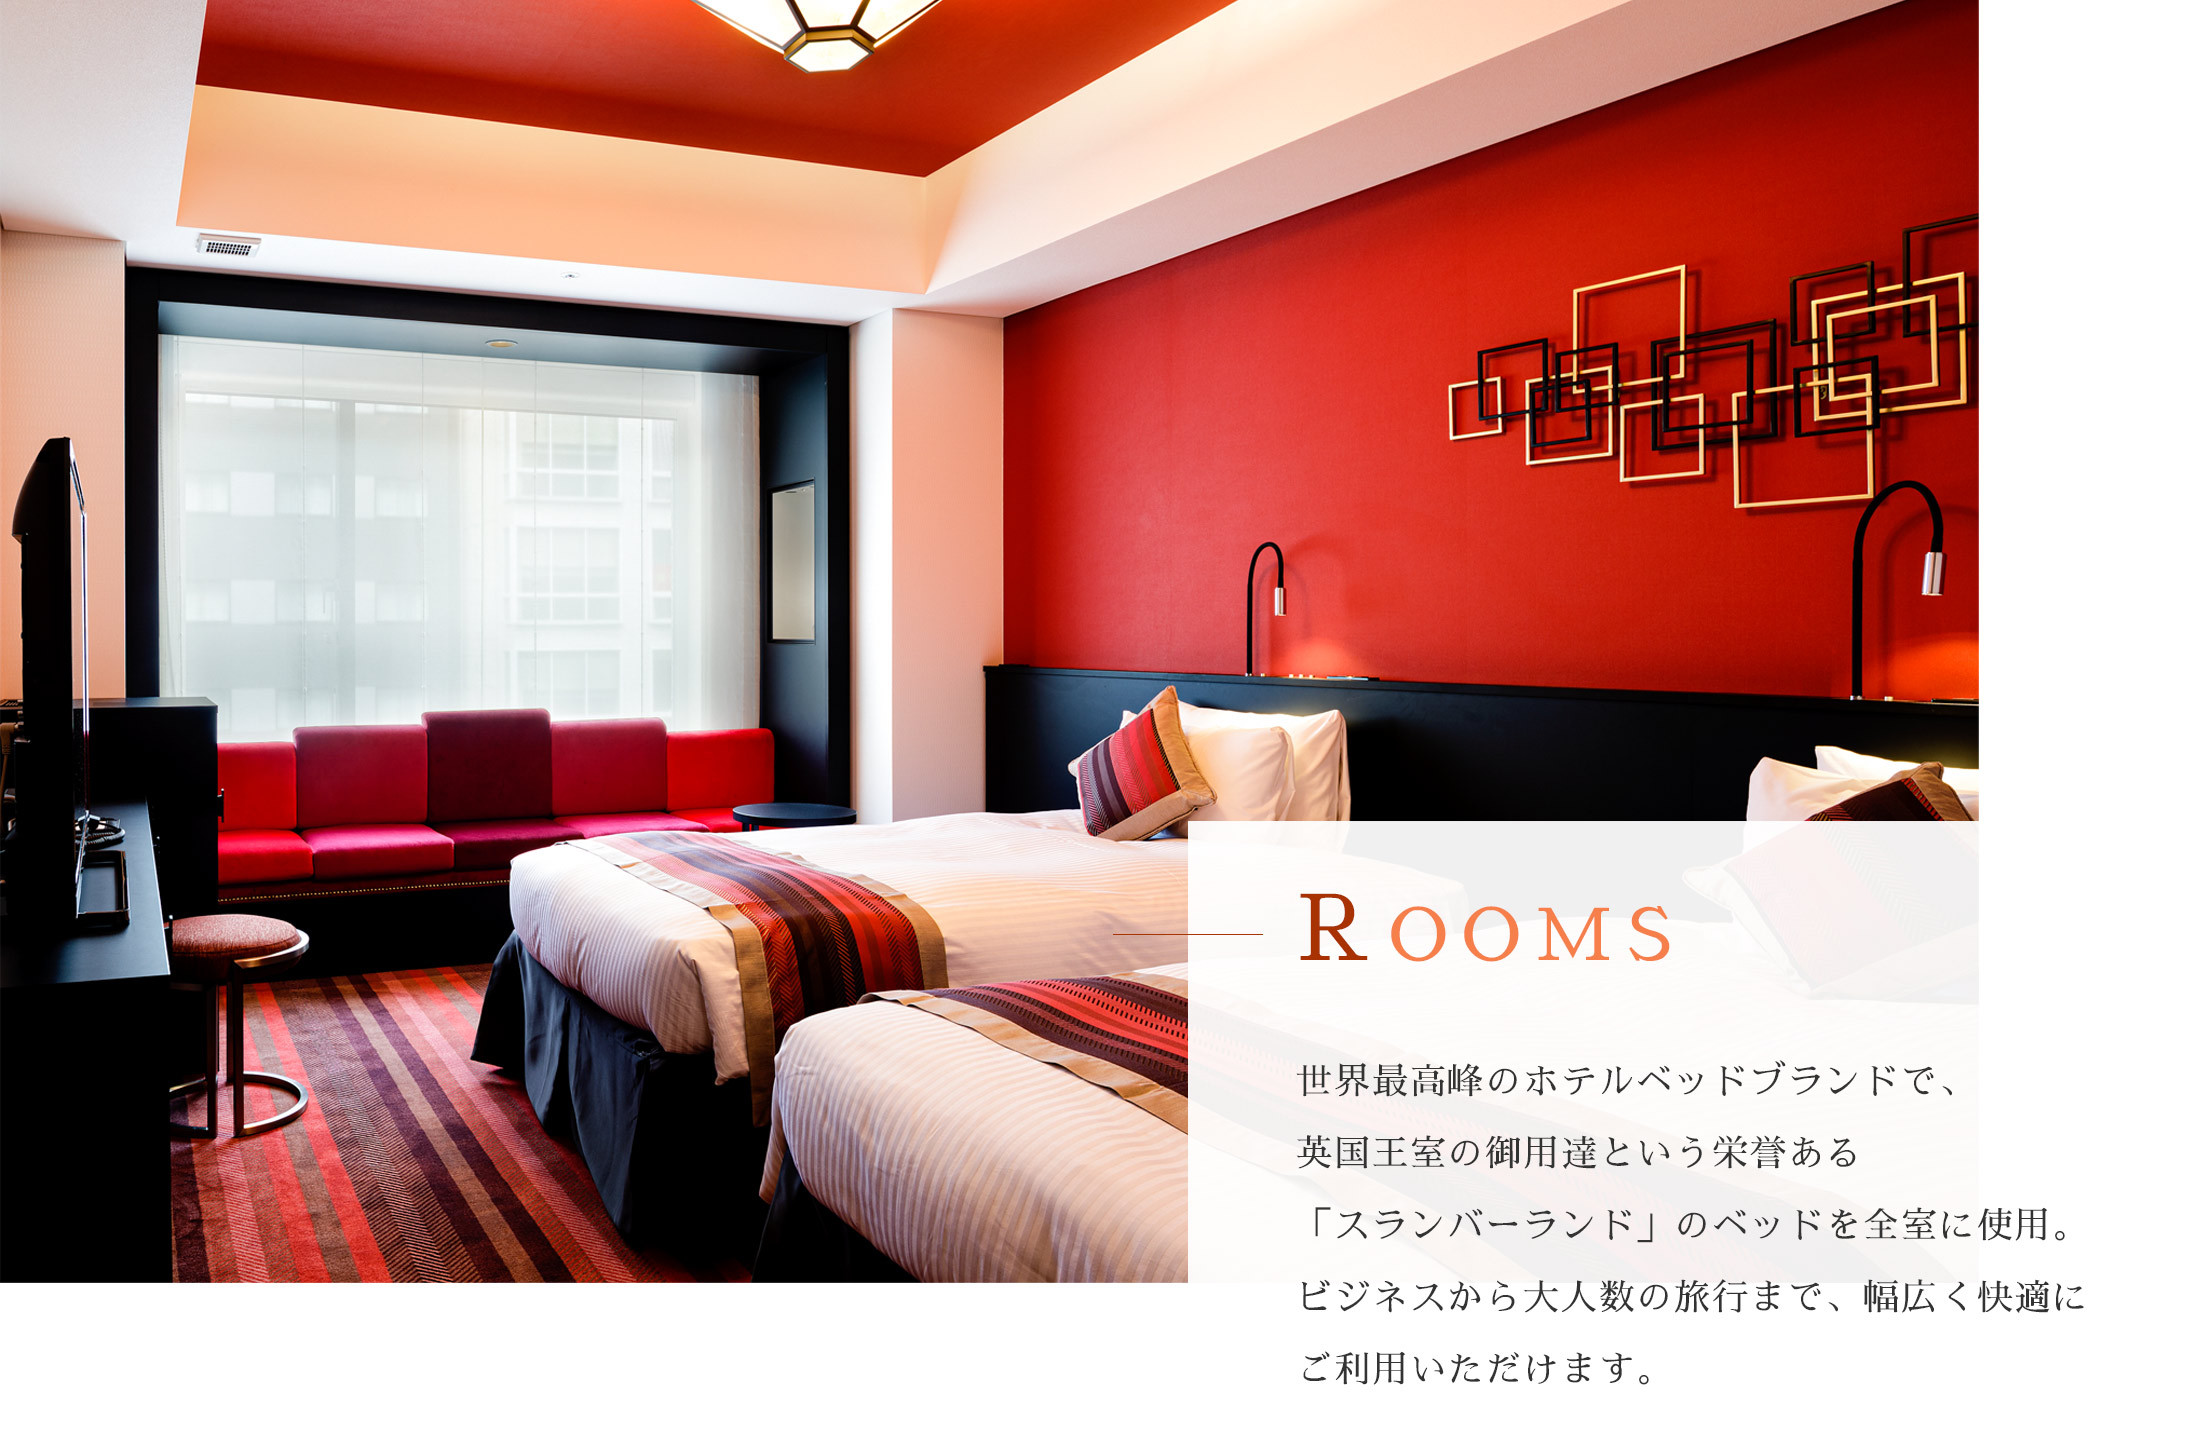 About  Rooms